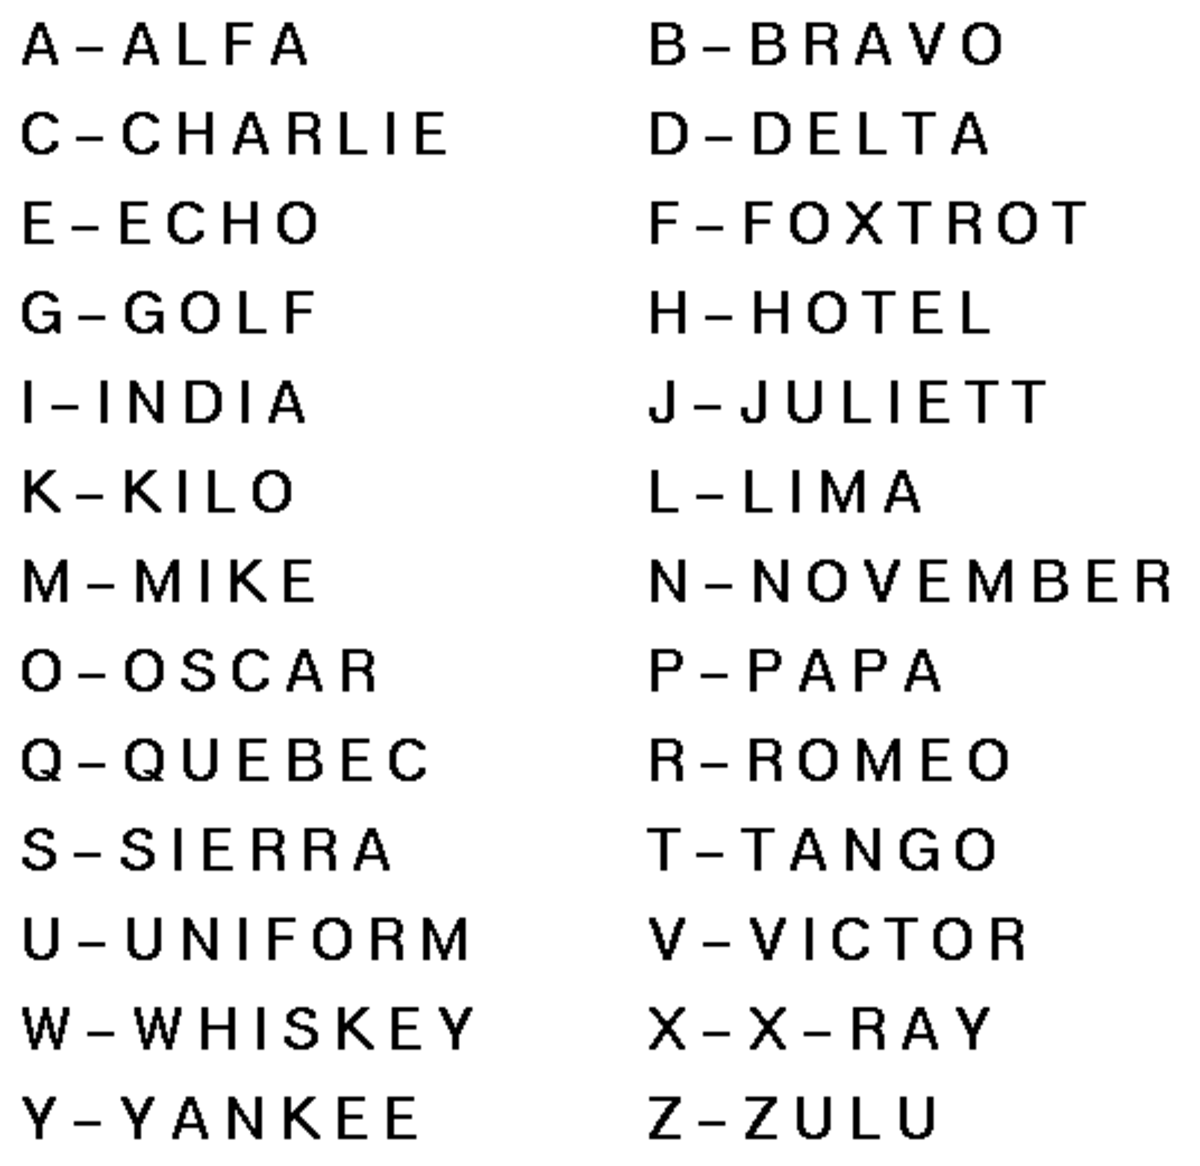 Us Police Phonetic Alphabet : Police 10 Codes Ten Codes For Law Enforcement Radio Communication